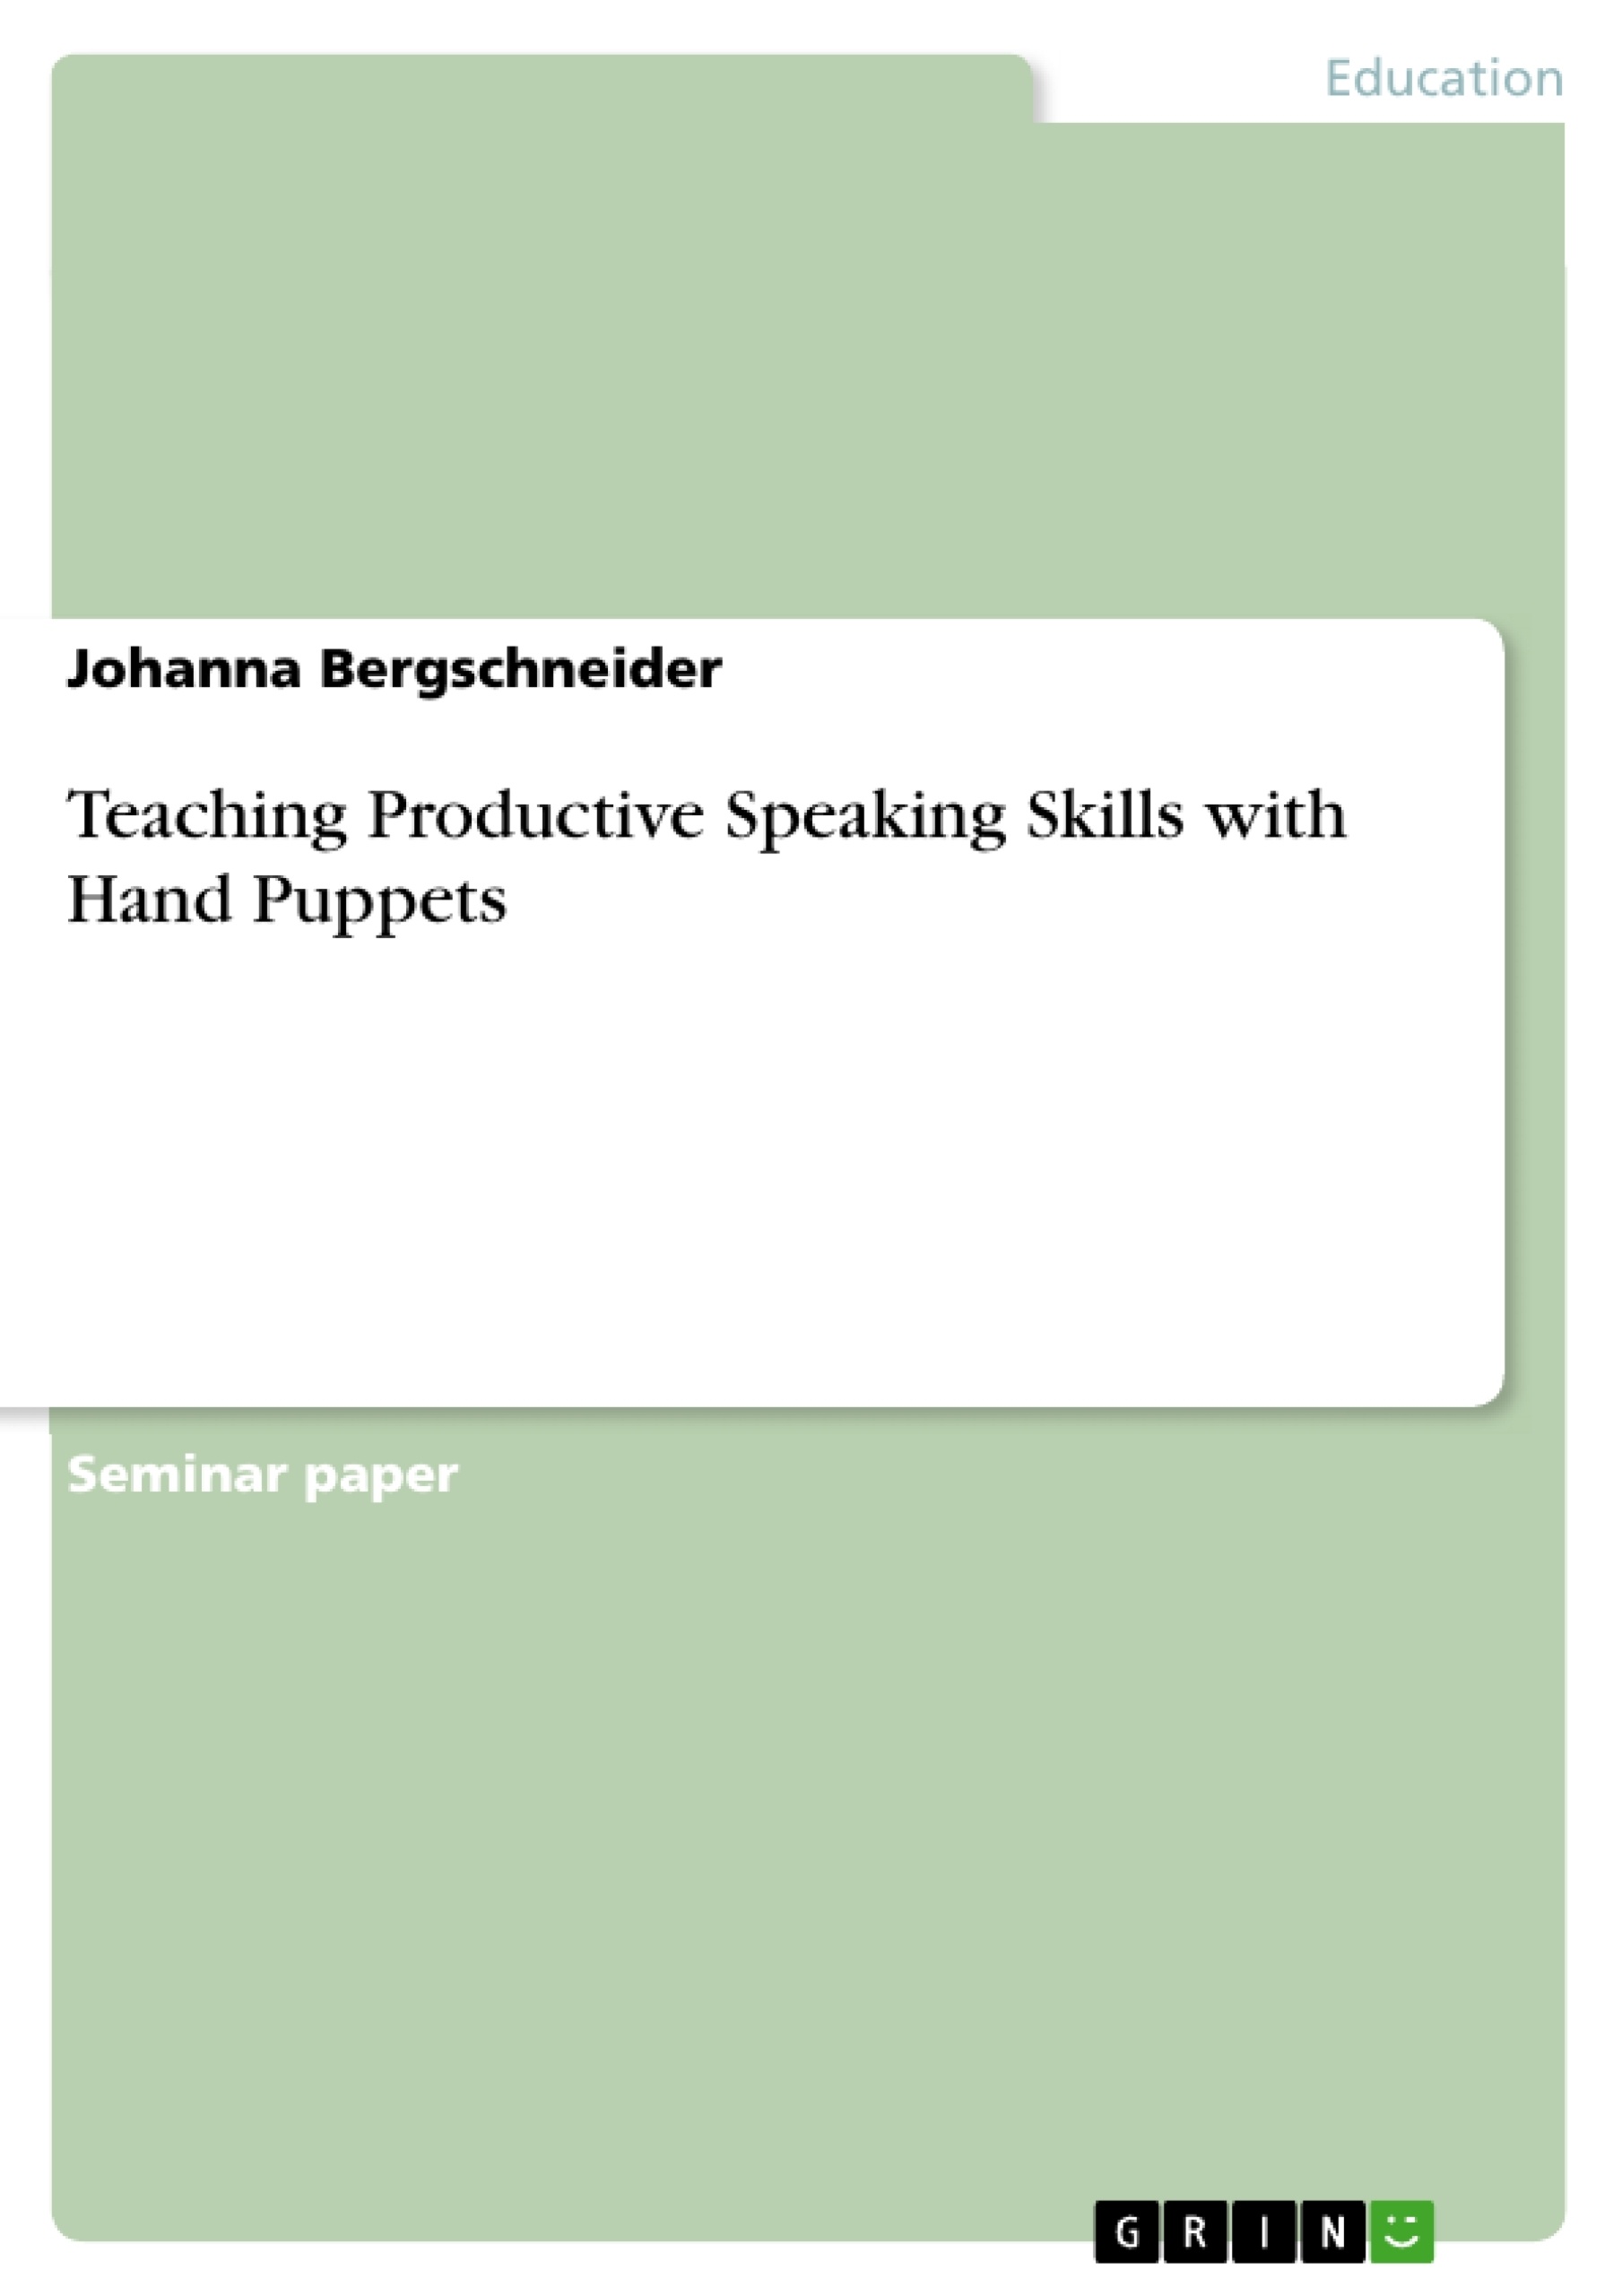 Title: Teaching Productive Speaking Skills with Hand Puppets